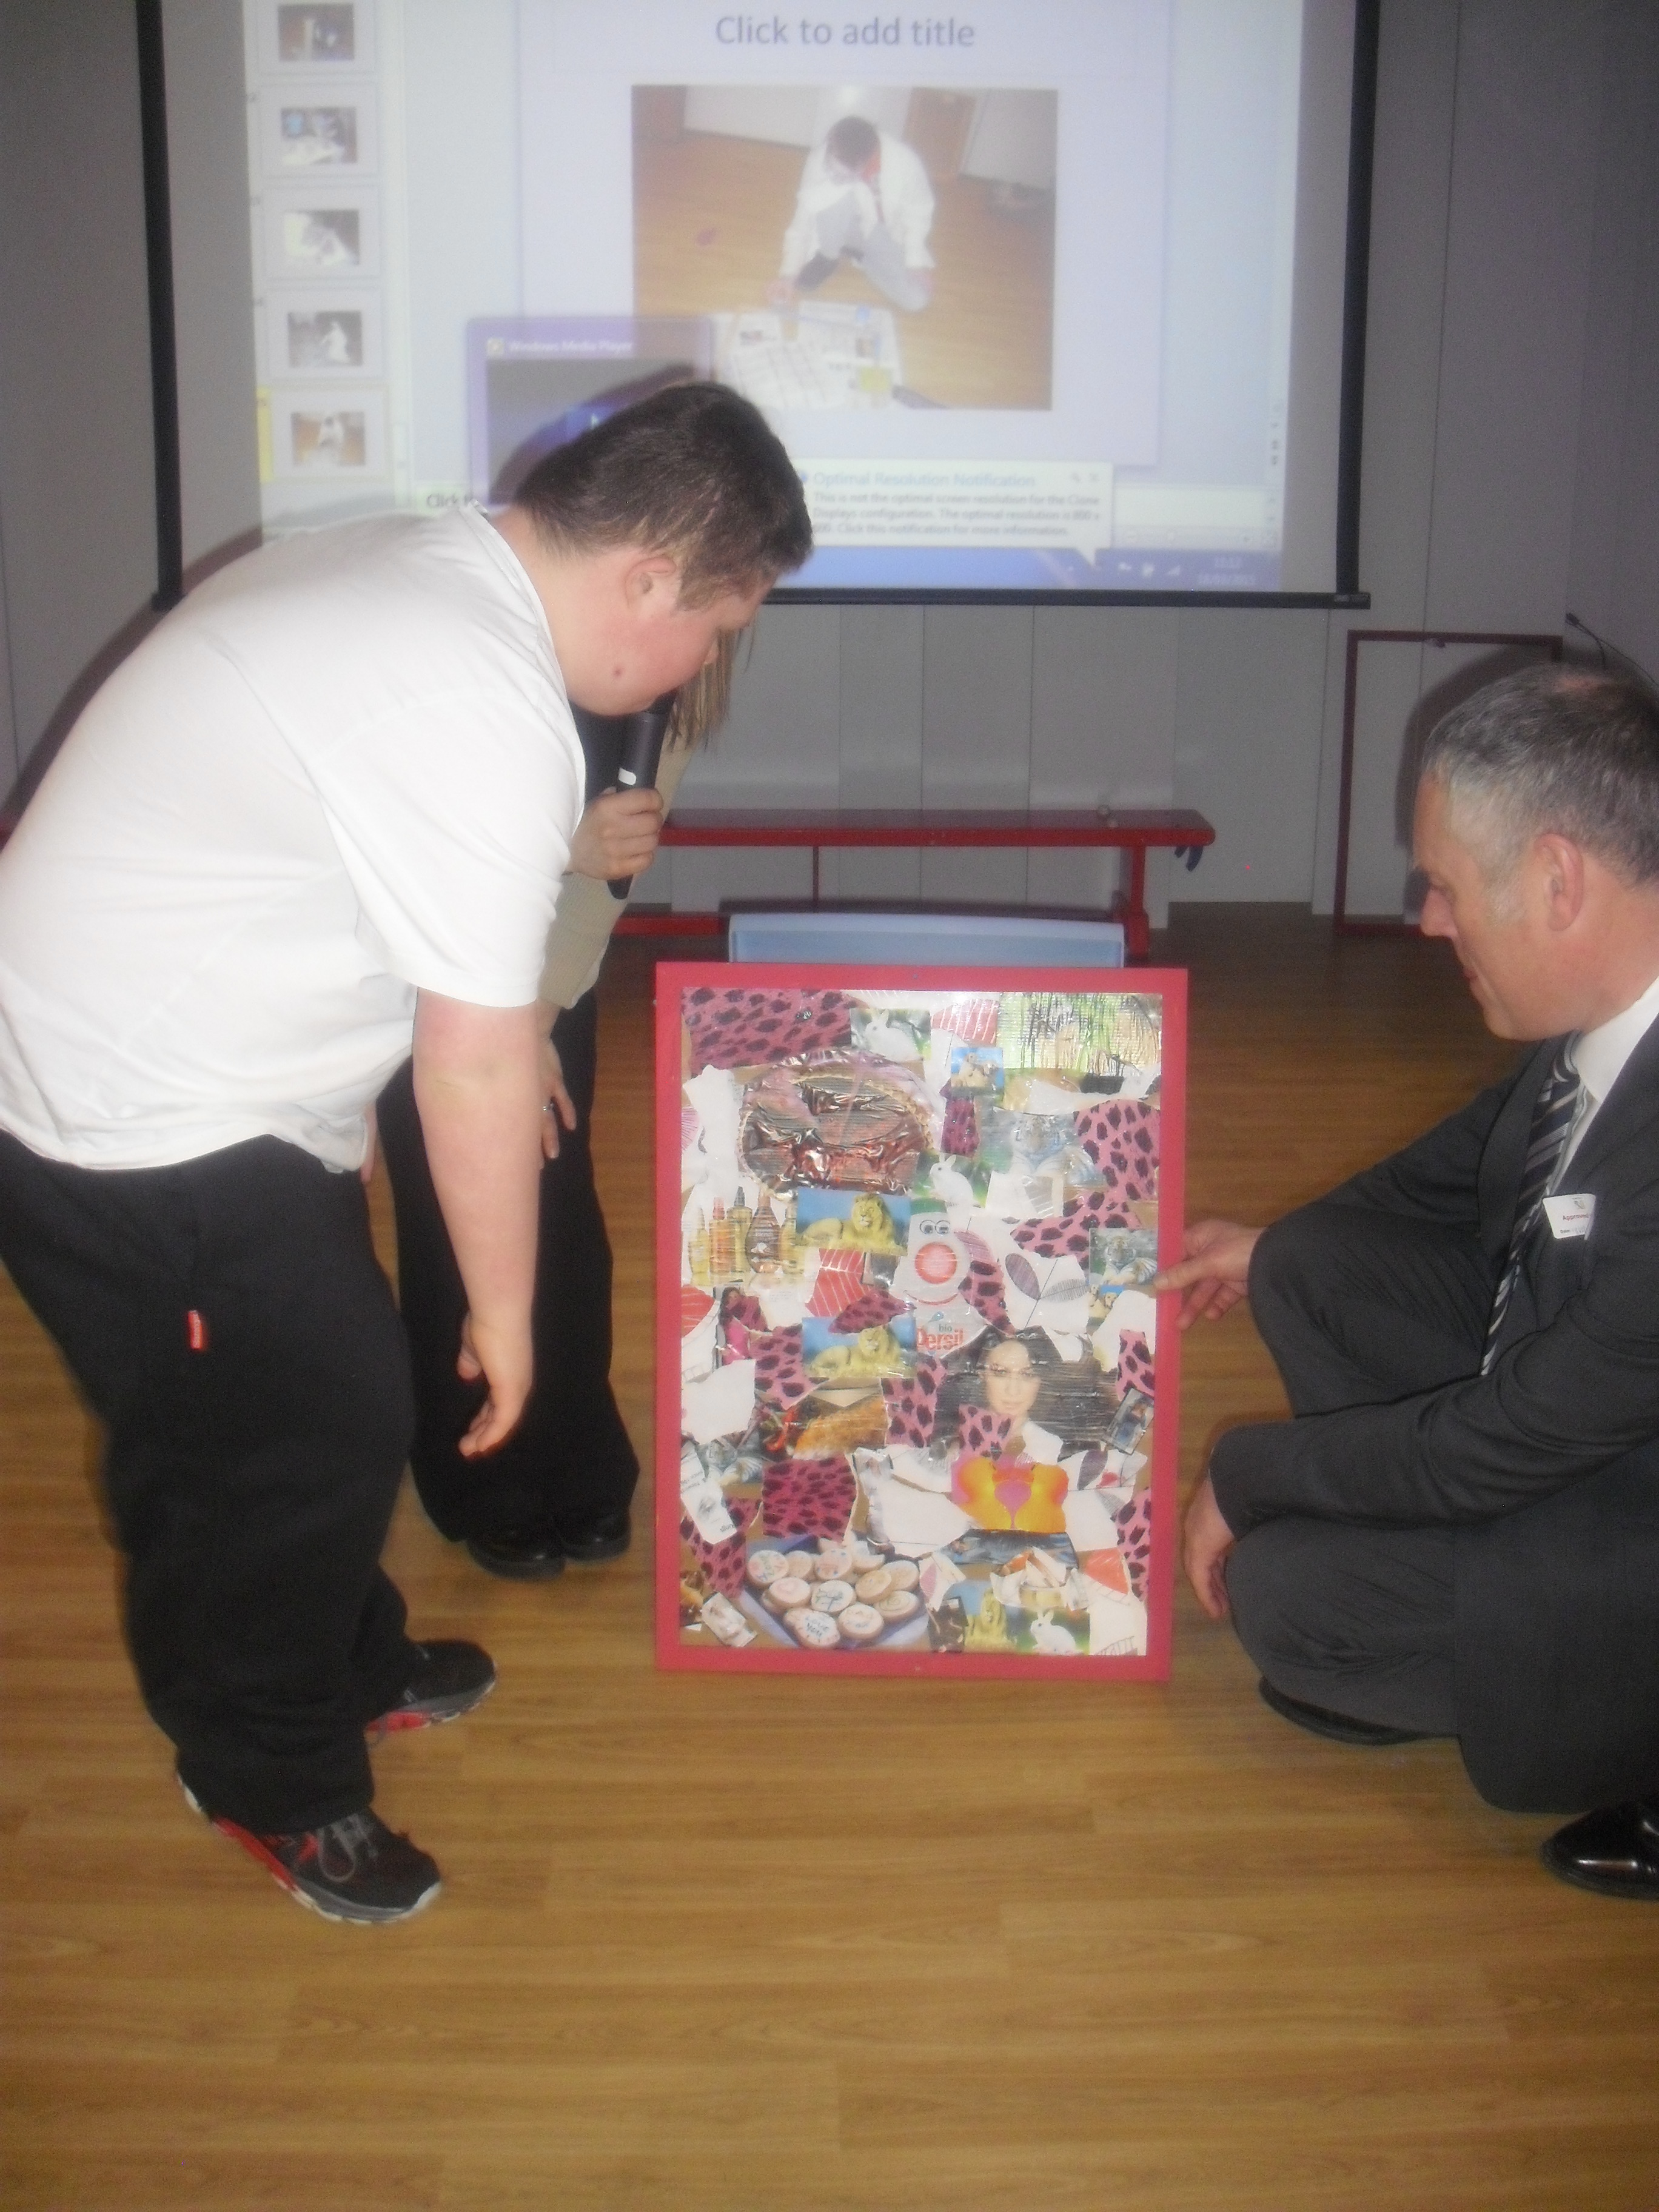 Up-Cycling project judged by Bob Eastwood